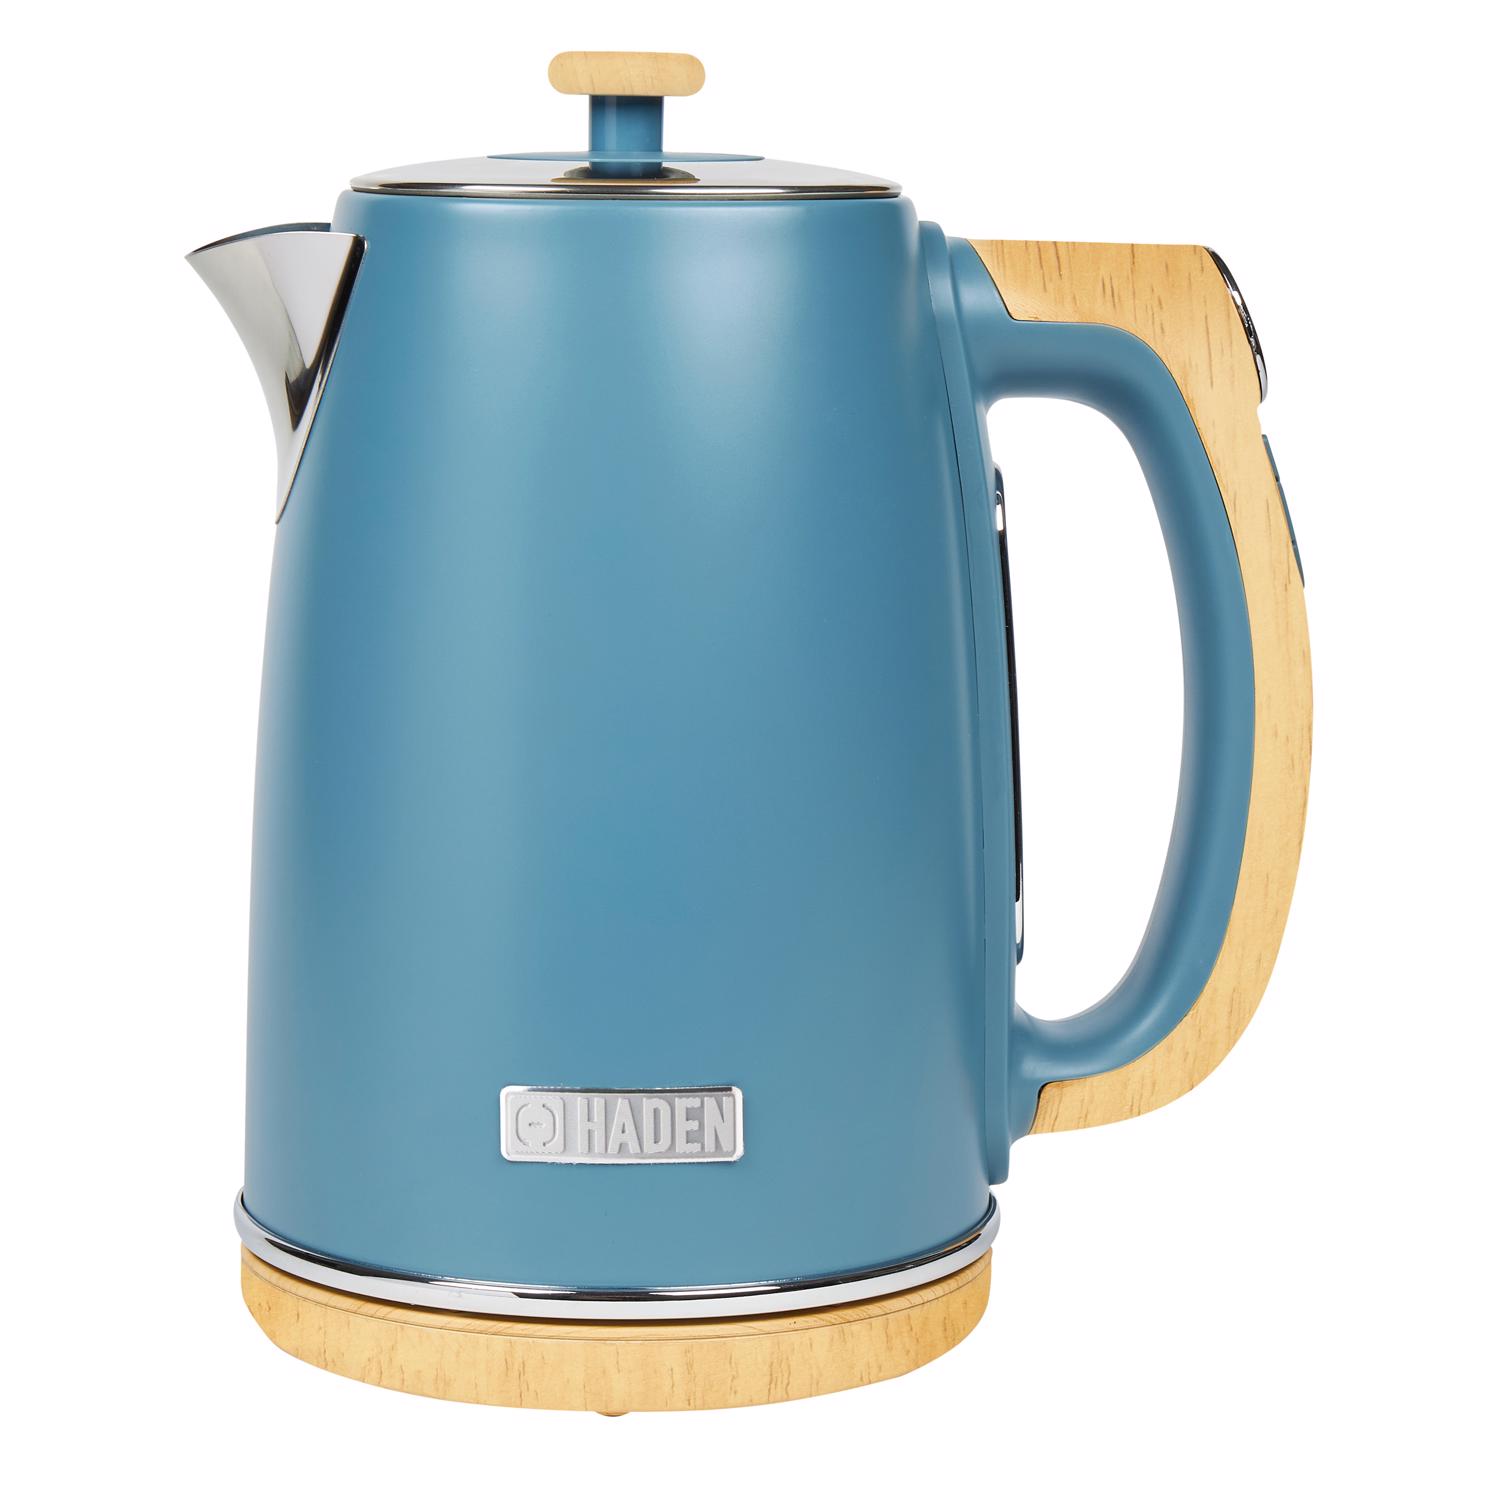 Photos - Other Accessories Haden Blue Modern Stainless Steel 1.7 L Electric Tea Kettle 75047 